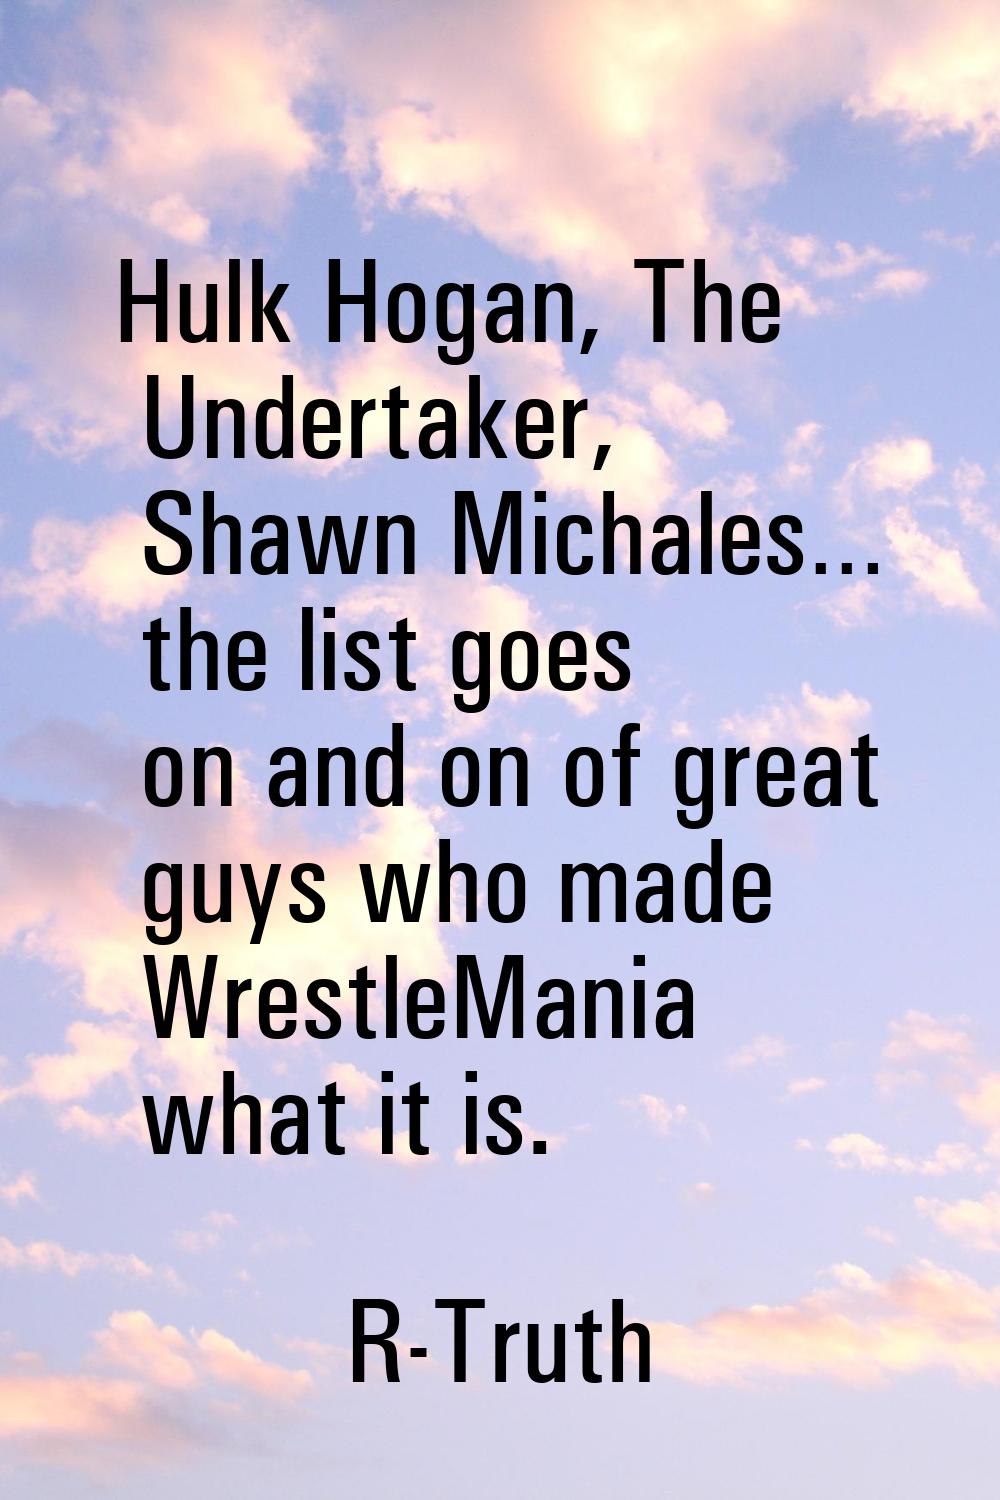 Hulk Hogan, The Undertaker, Shawn Michales… the list goes on and on of great guys who made WrestleM